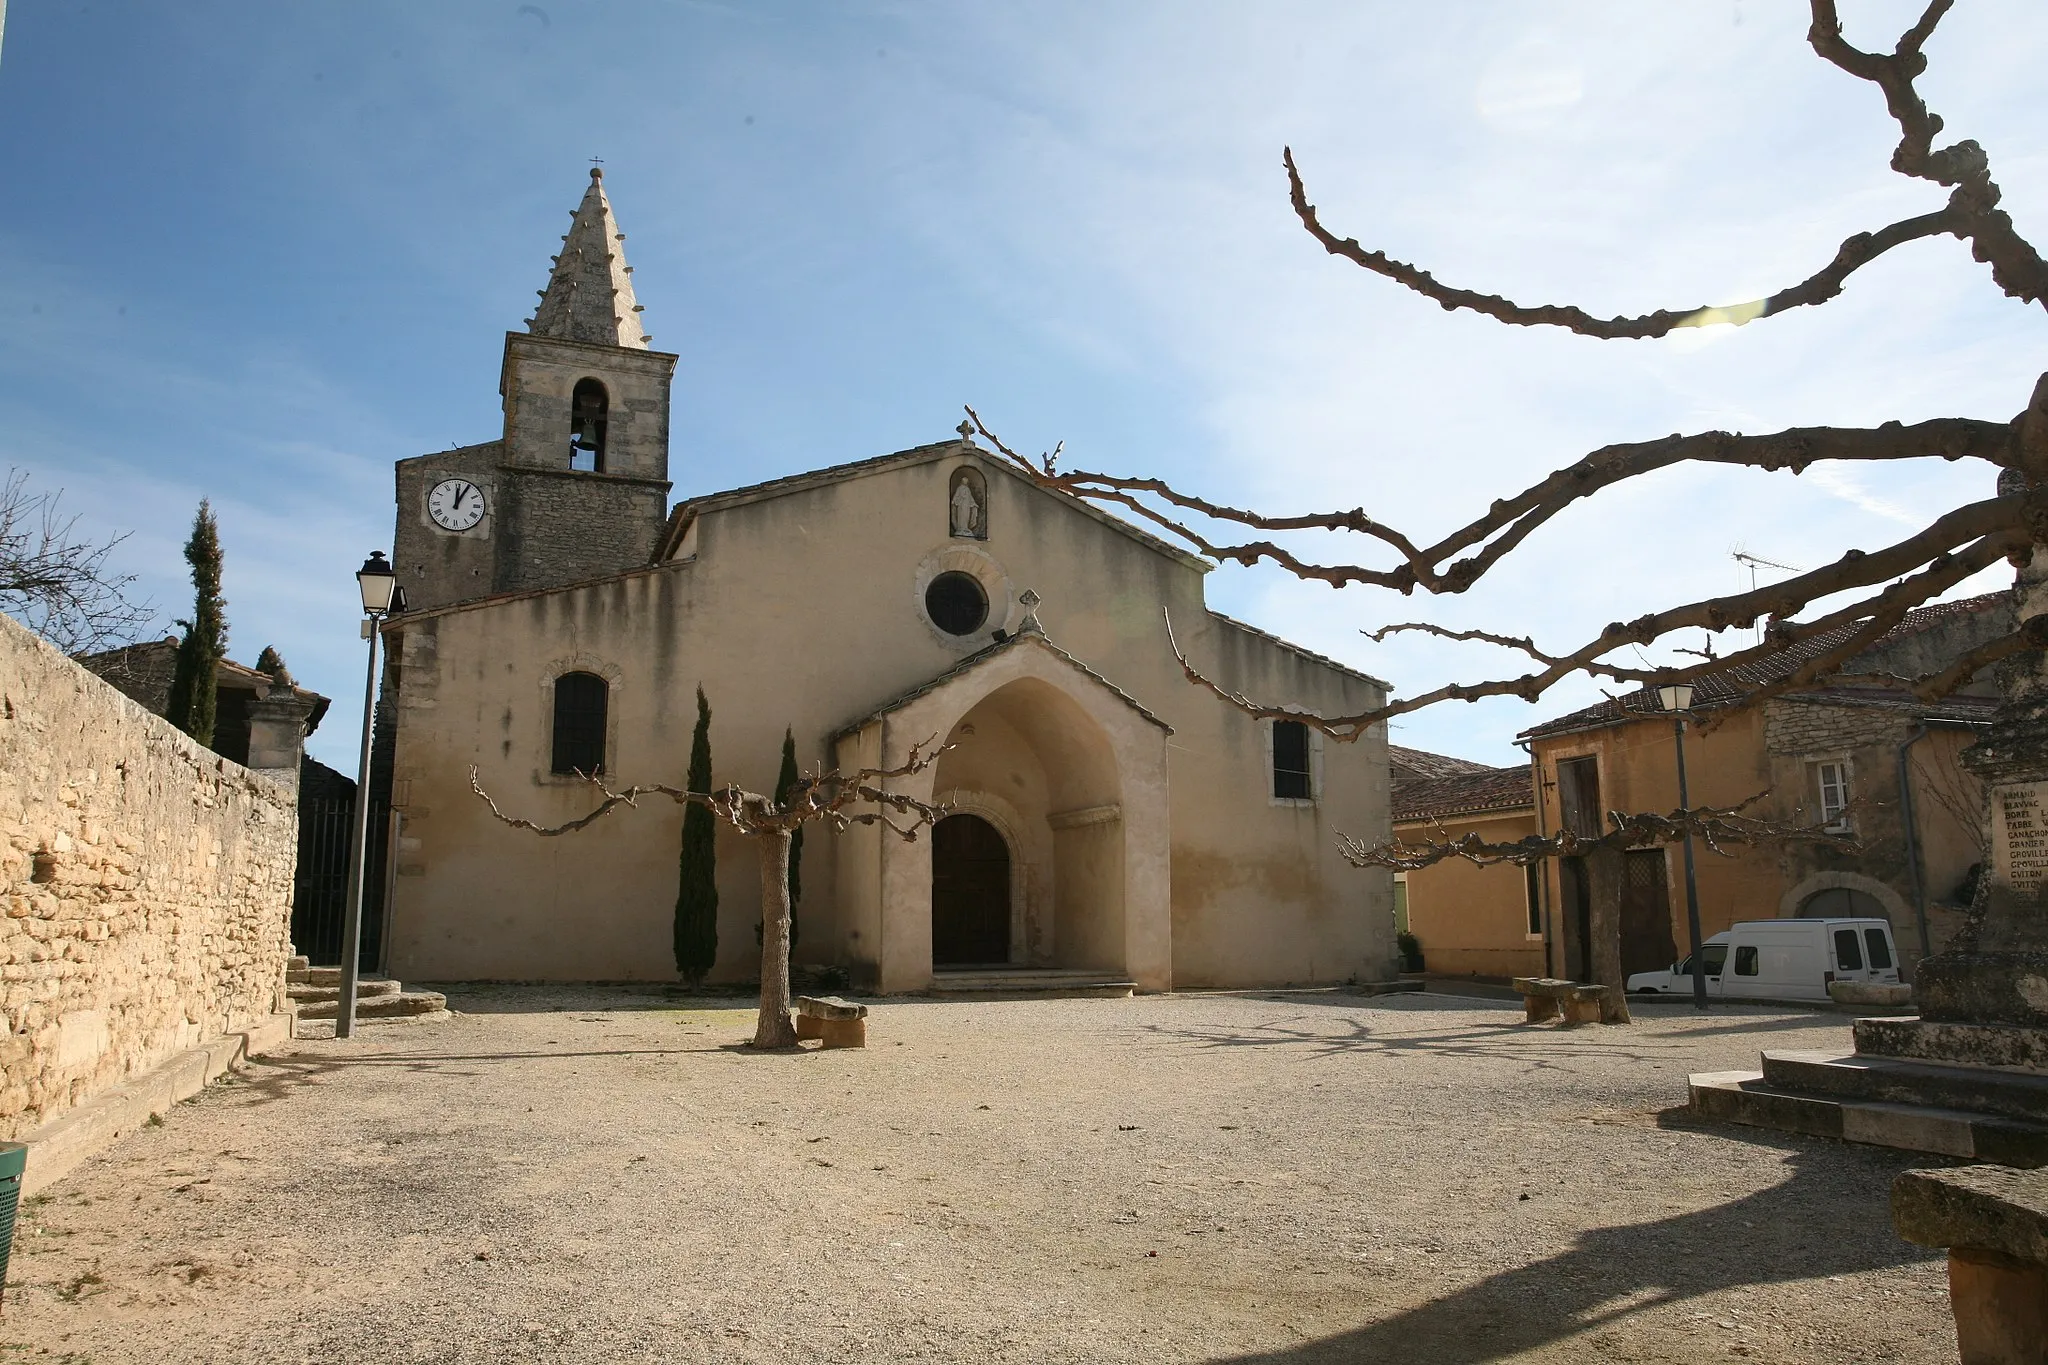 Photo showing: the curch of Cabrieres d'Avignon in Vaucluse, France